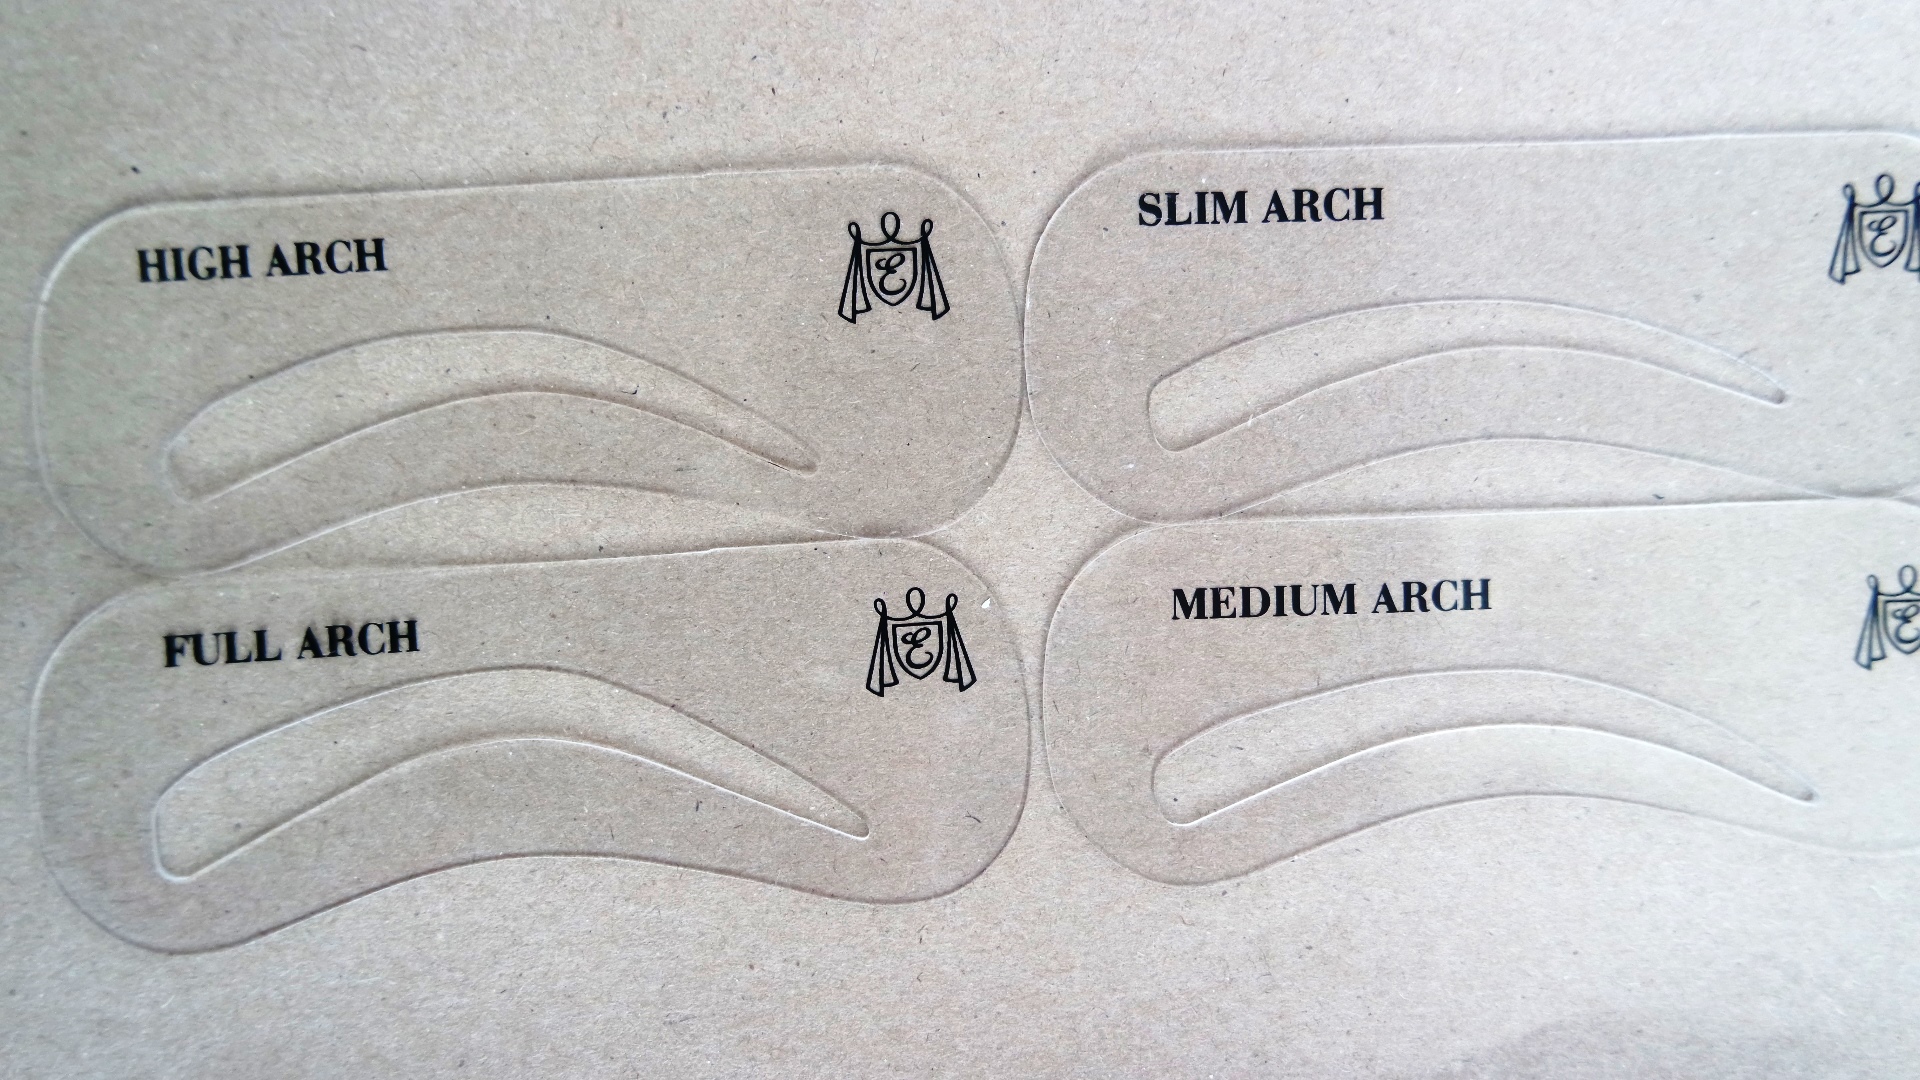 Shaping eyebrows using an eyebrow stencil - the different arches available